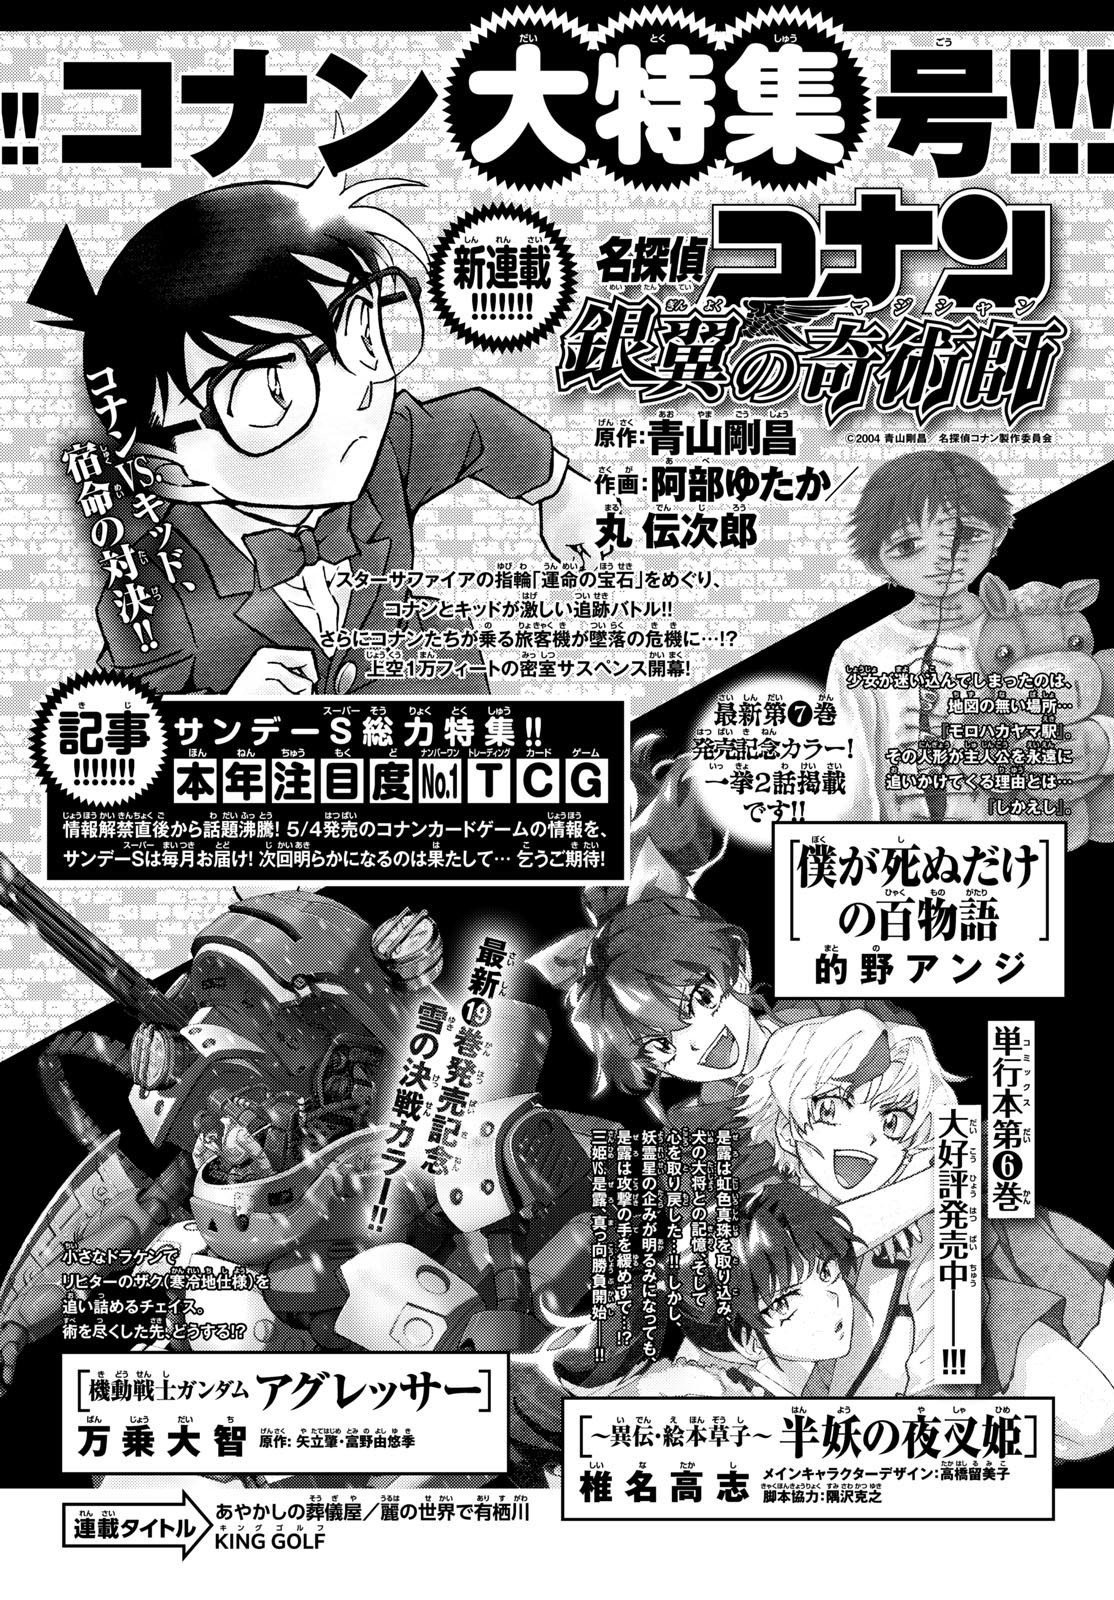 Weekly Shōnen Sunday - 週刊少年サンデー - Chapter 2024-13 - Page 366